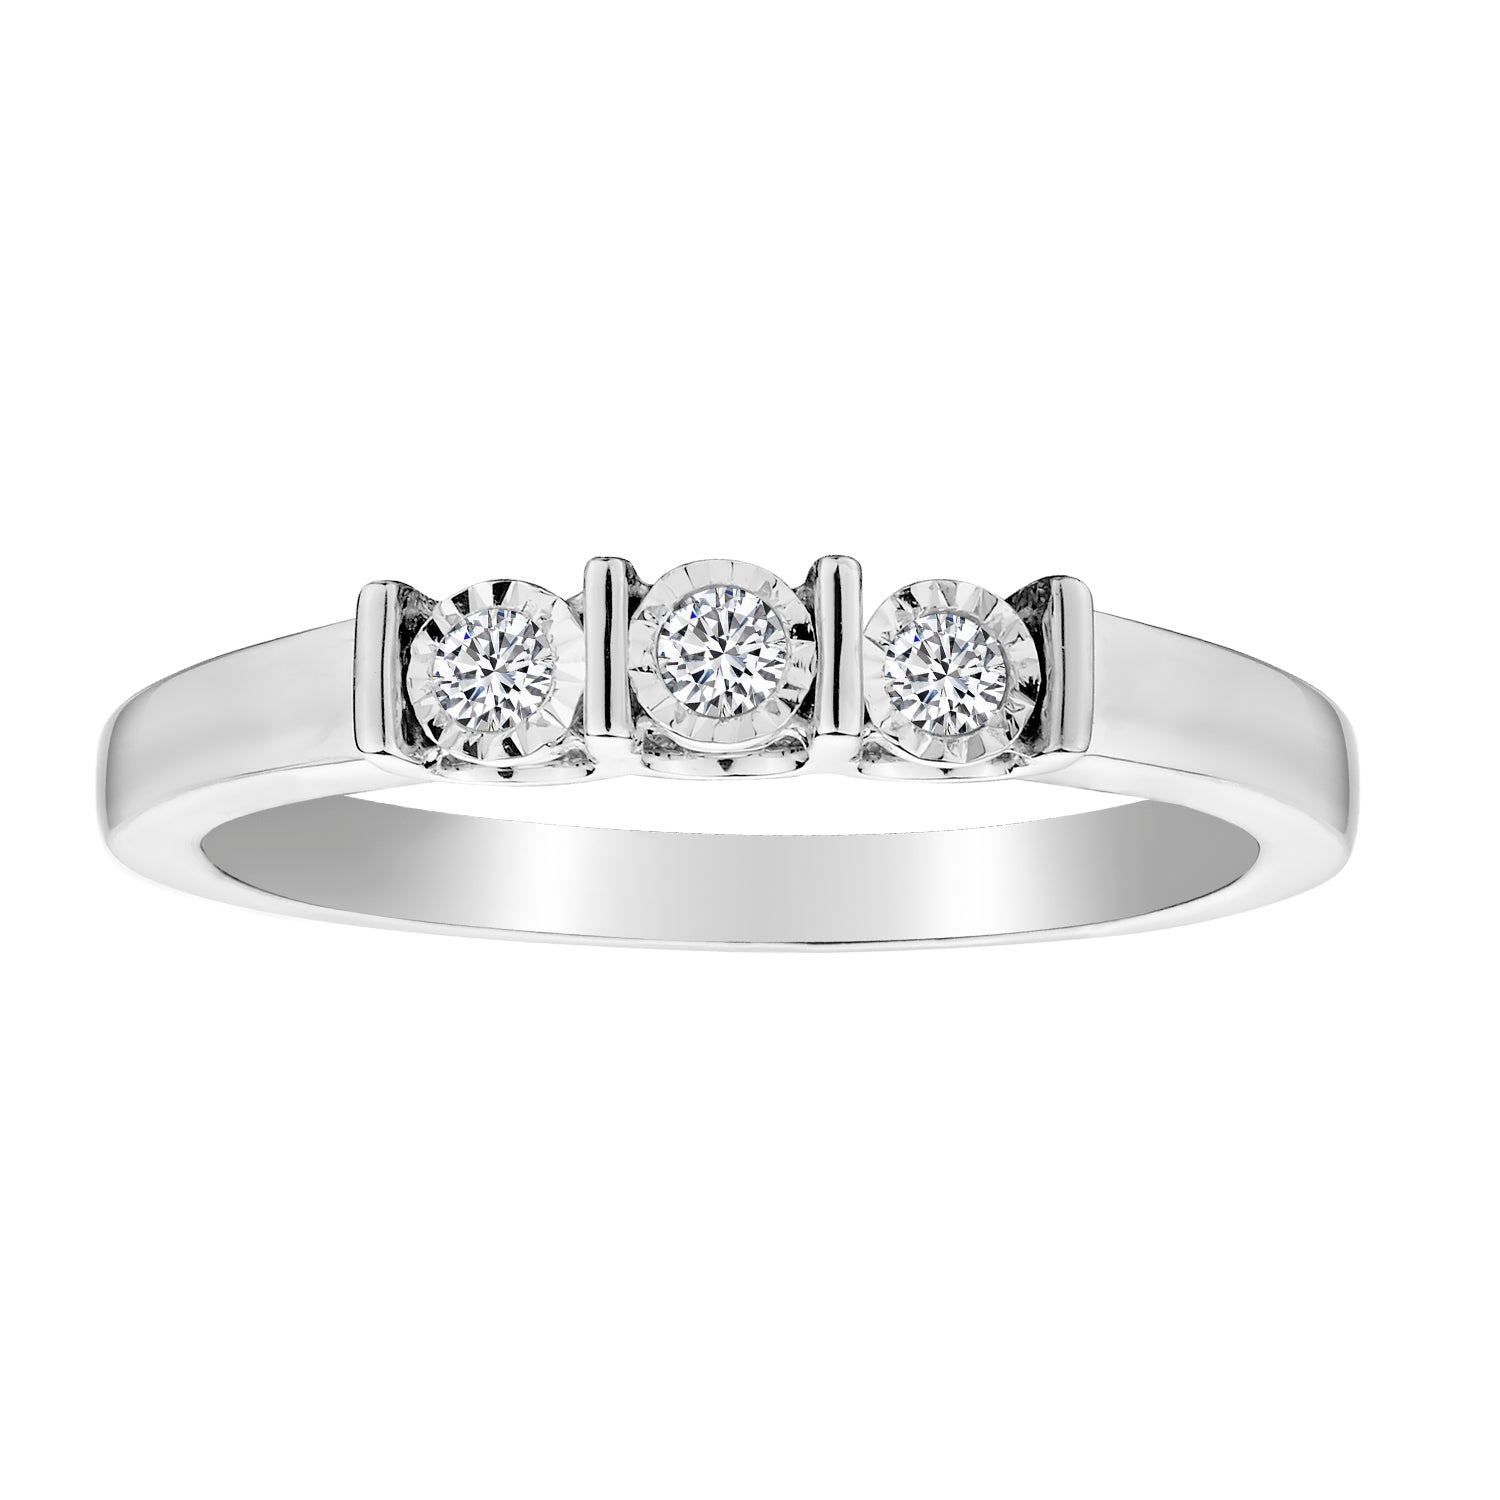 .10 Carat of Diamonds "Past, Present, Future" Ring, 10kt White Gold...................NOW